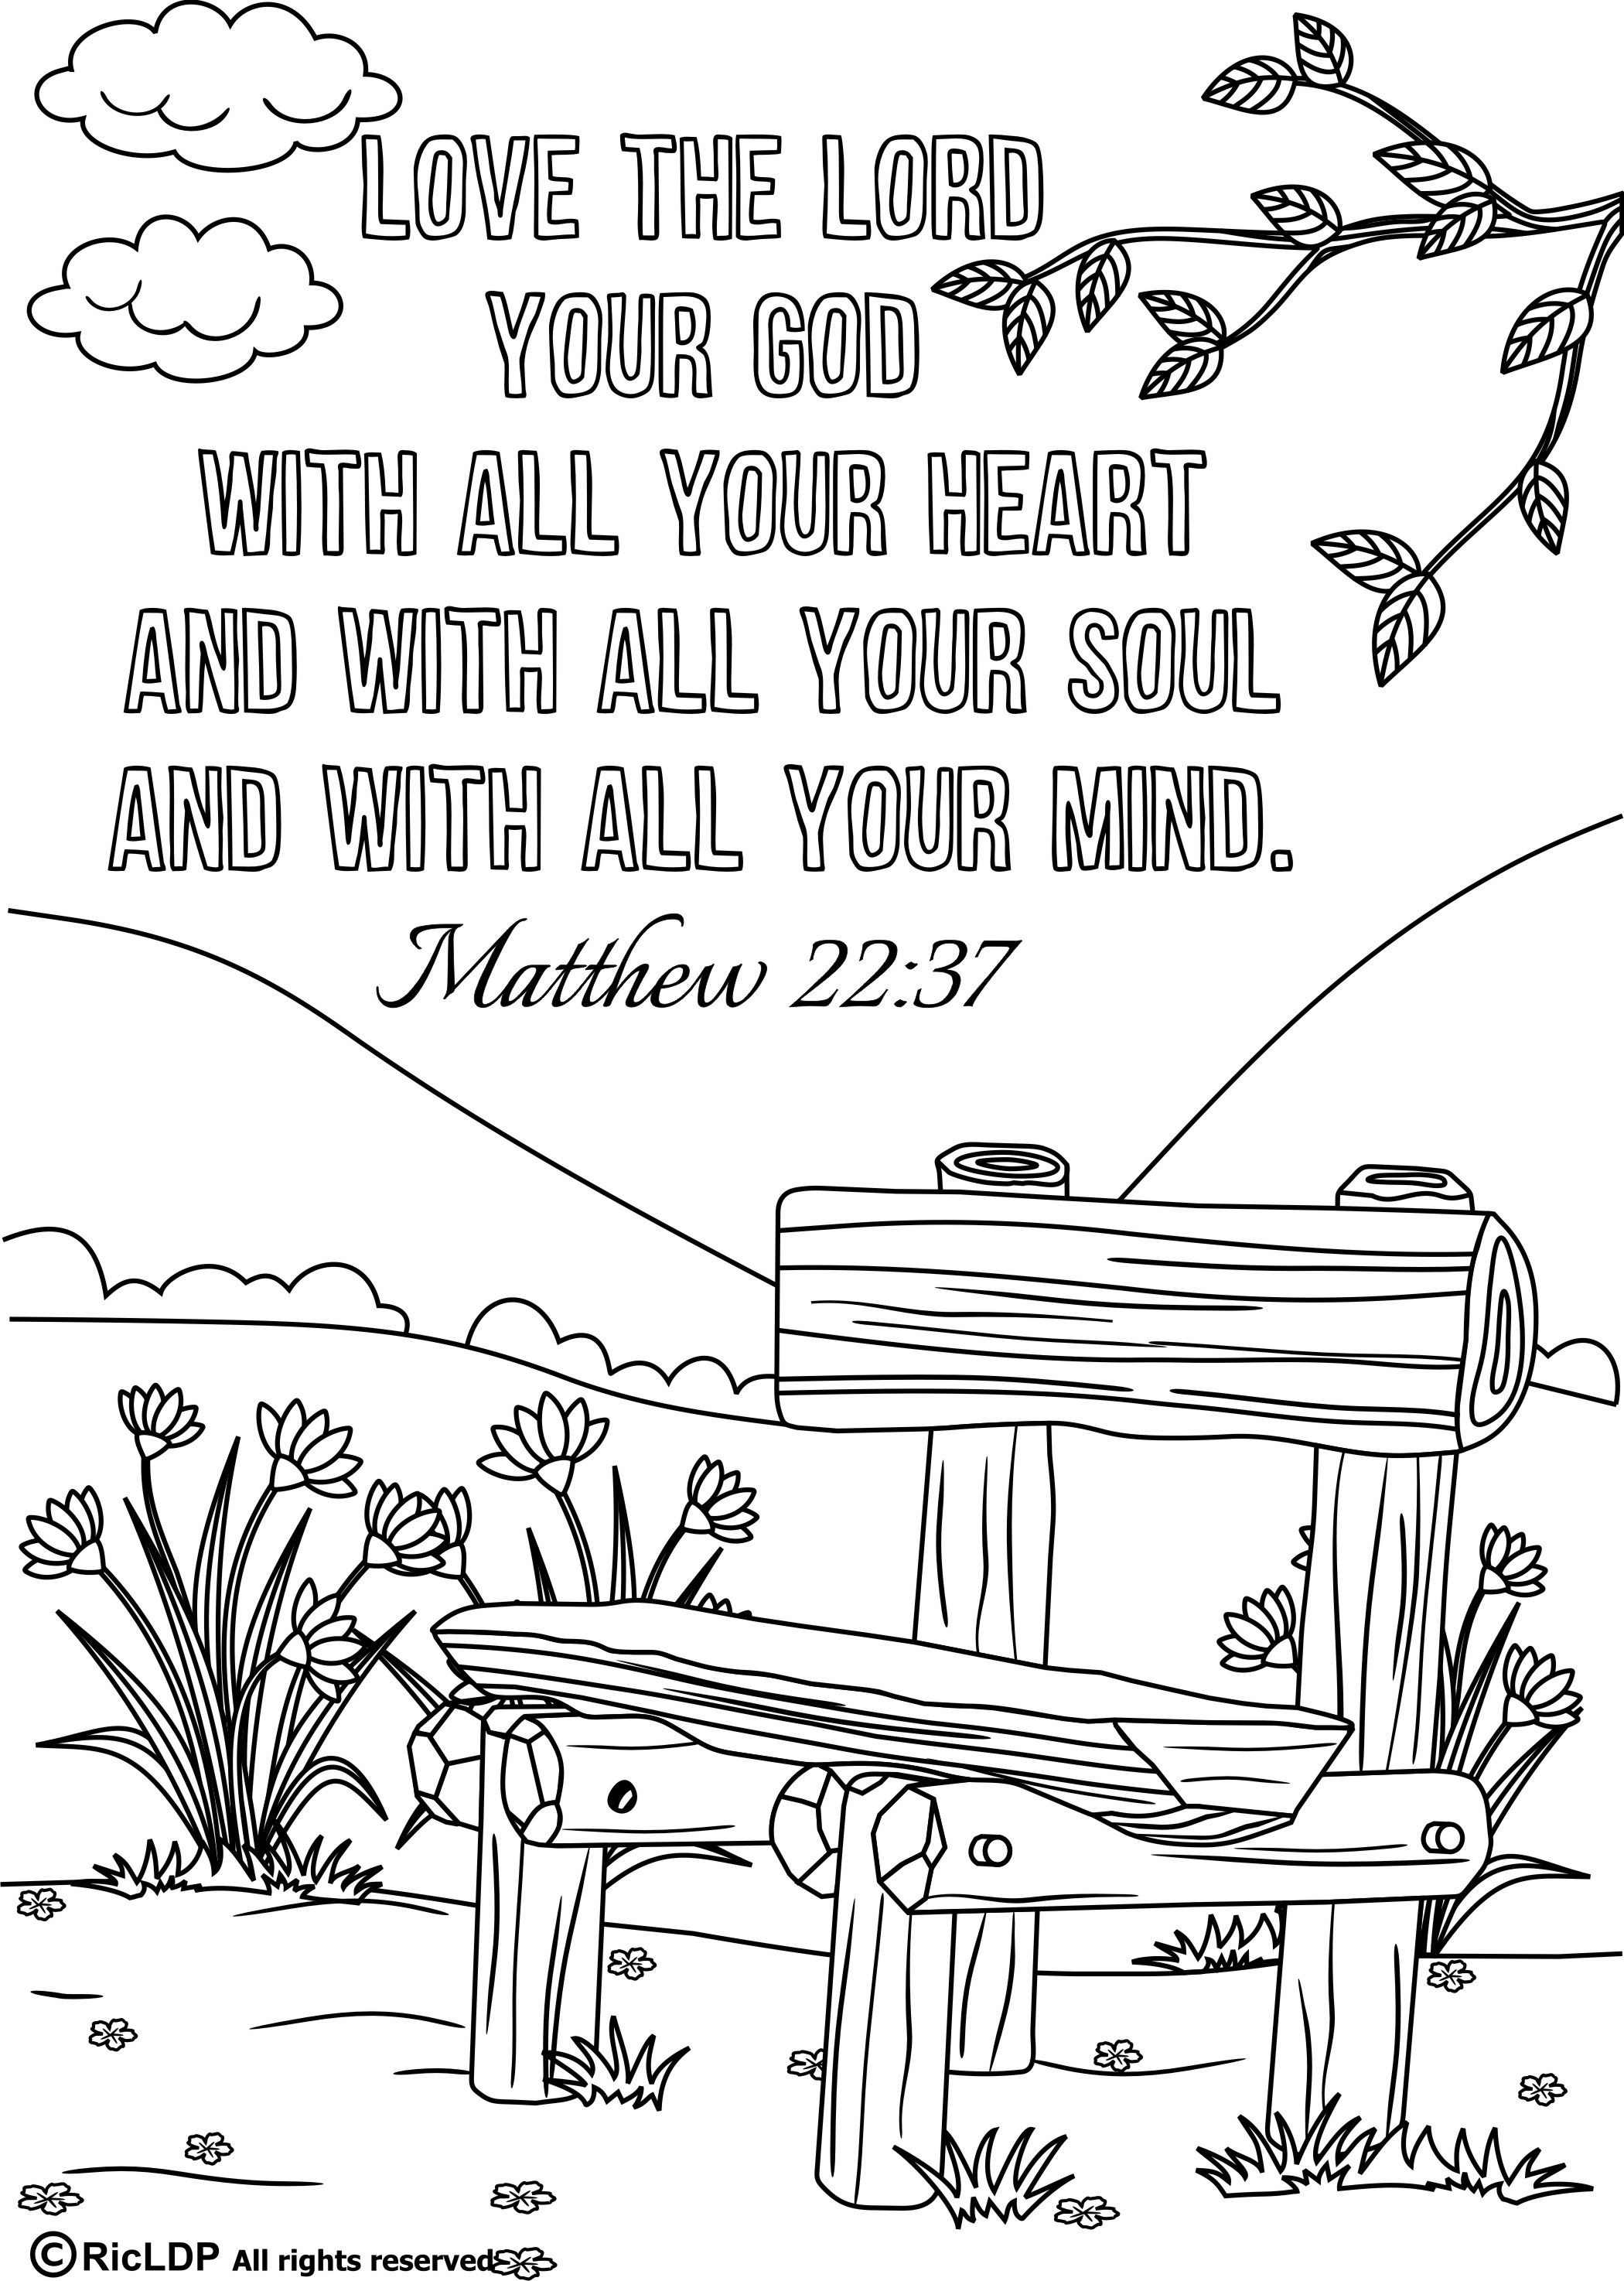 Heart Coloring Pages Pdf Coloring Ideas Bibleerse Coloring Sheets Ideas Pages Pdf Fun Time